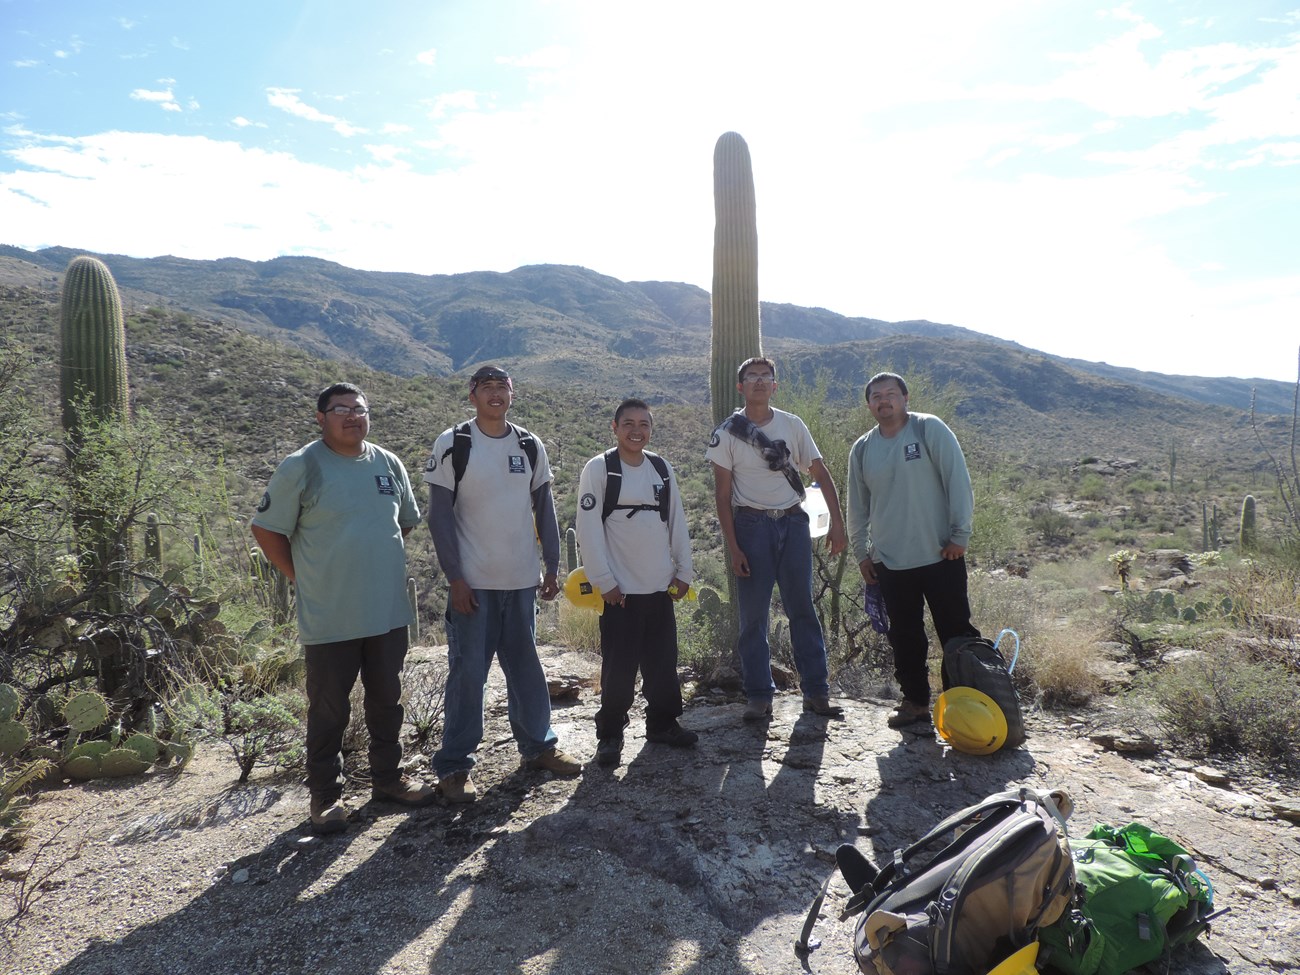 Ancestral Lands Crew posing for a photo after the census. Behind them are mountains and saguaros.